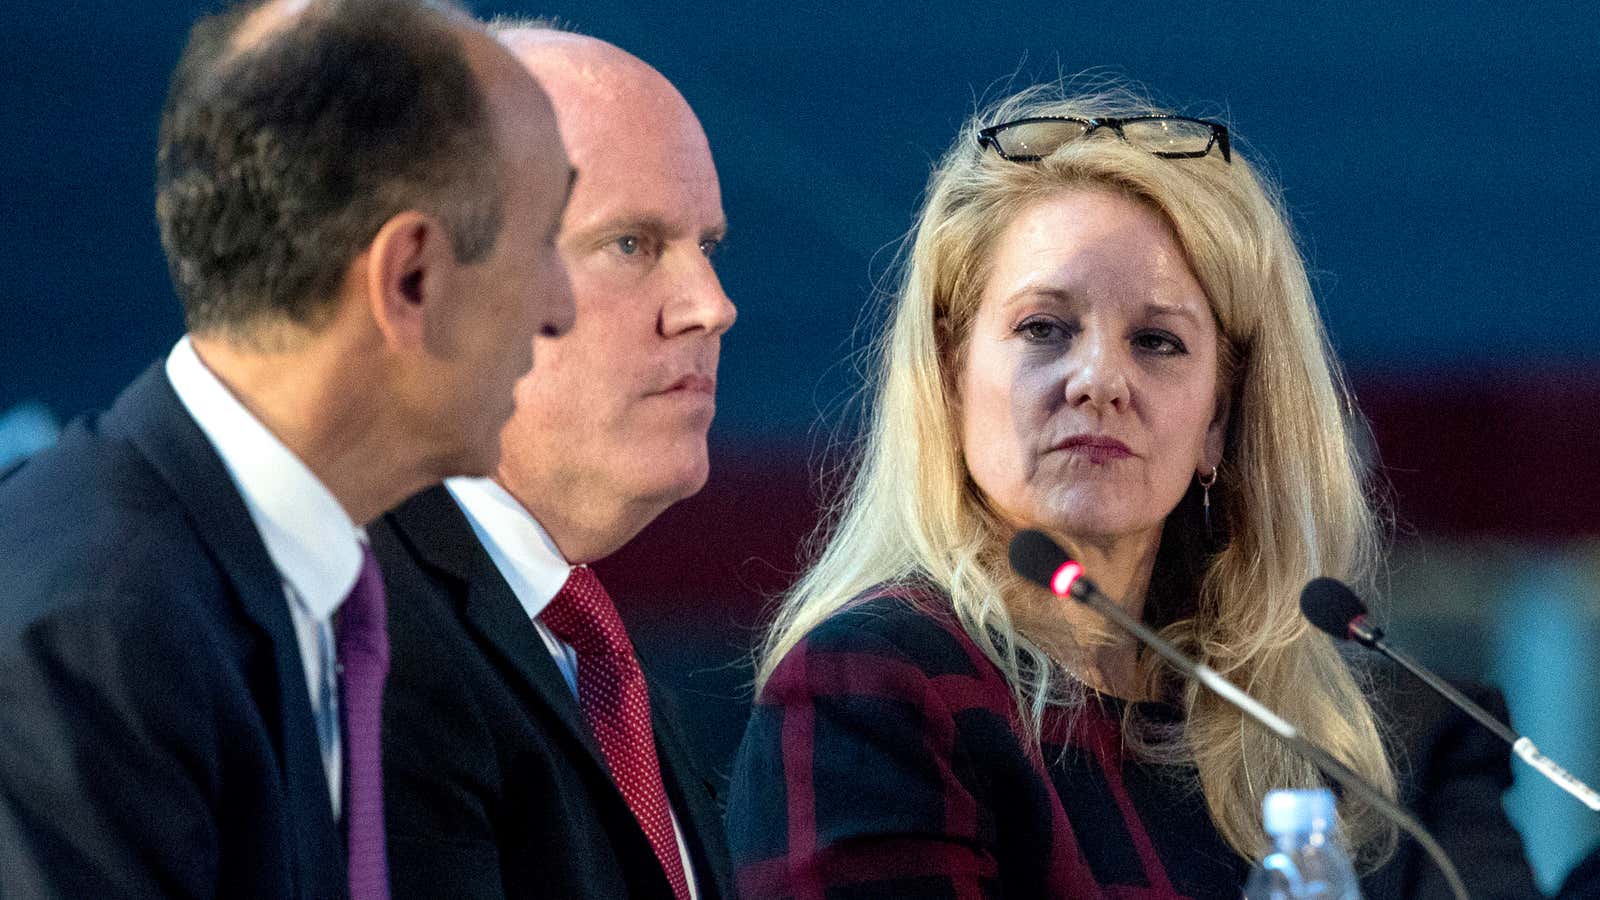 SpaceX’s Shotwell with the CEOs of two other rocket companies at a 2017 US Space Council meeting.